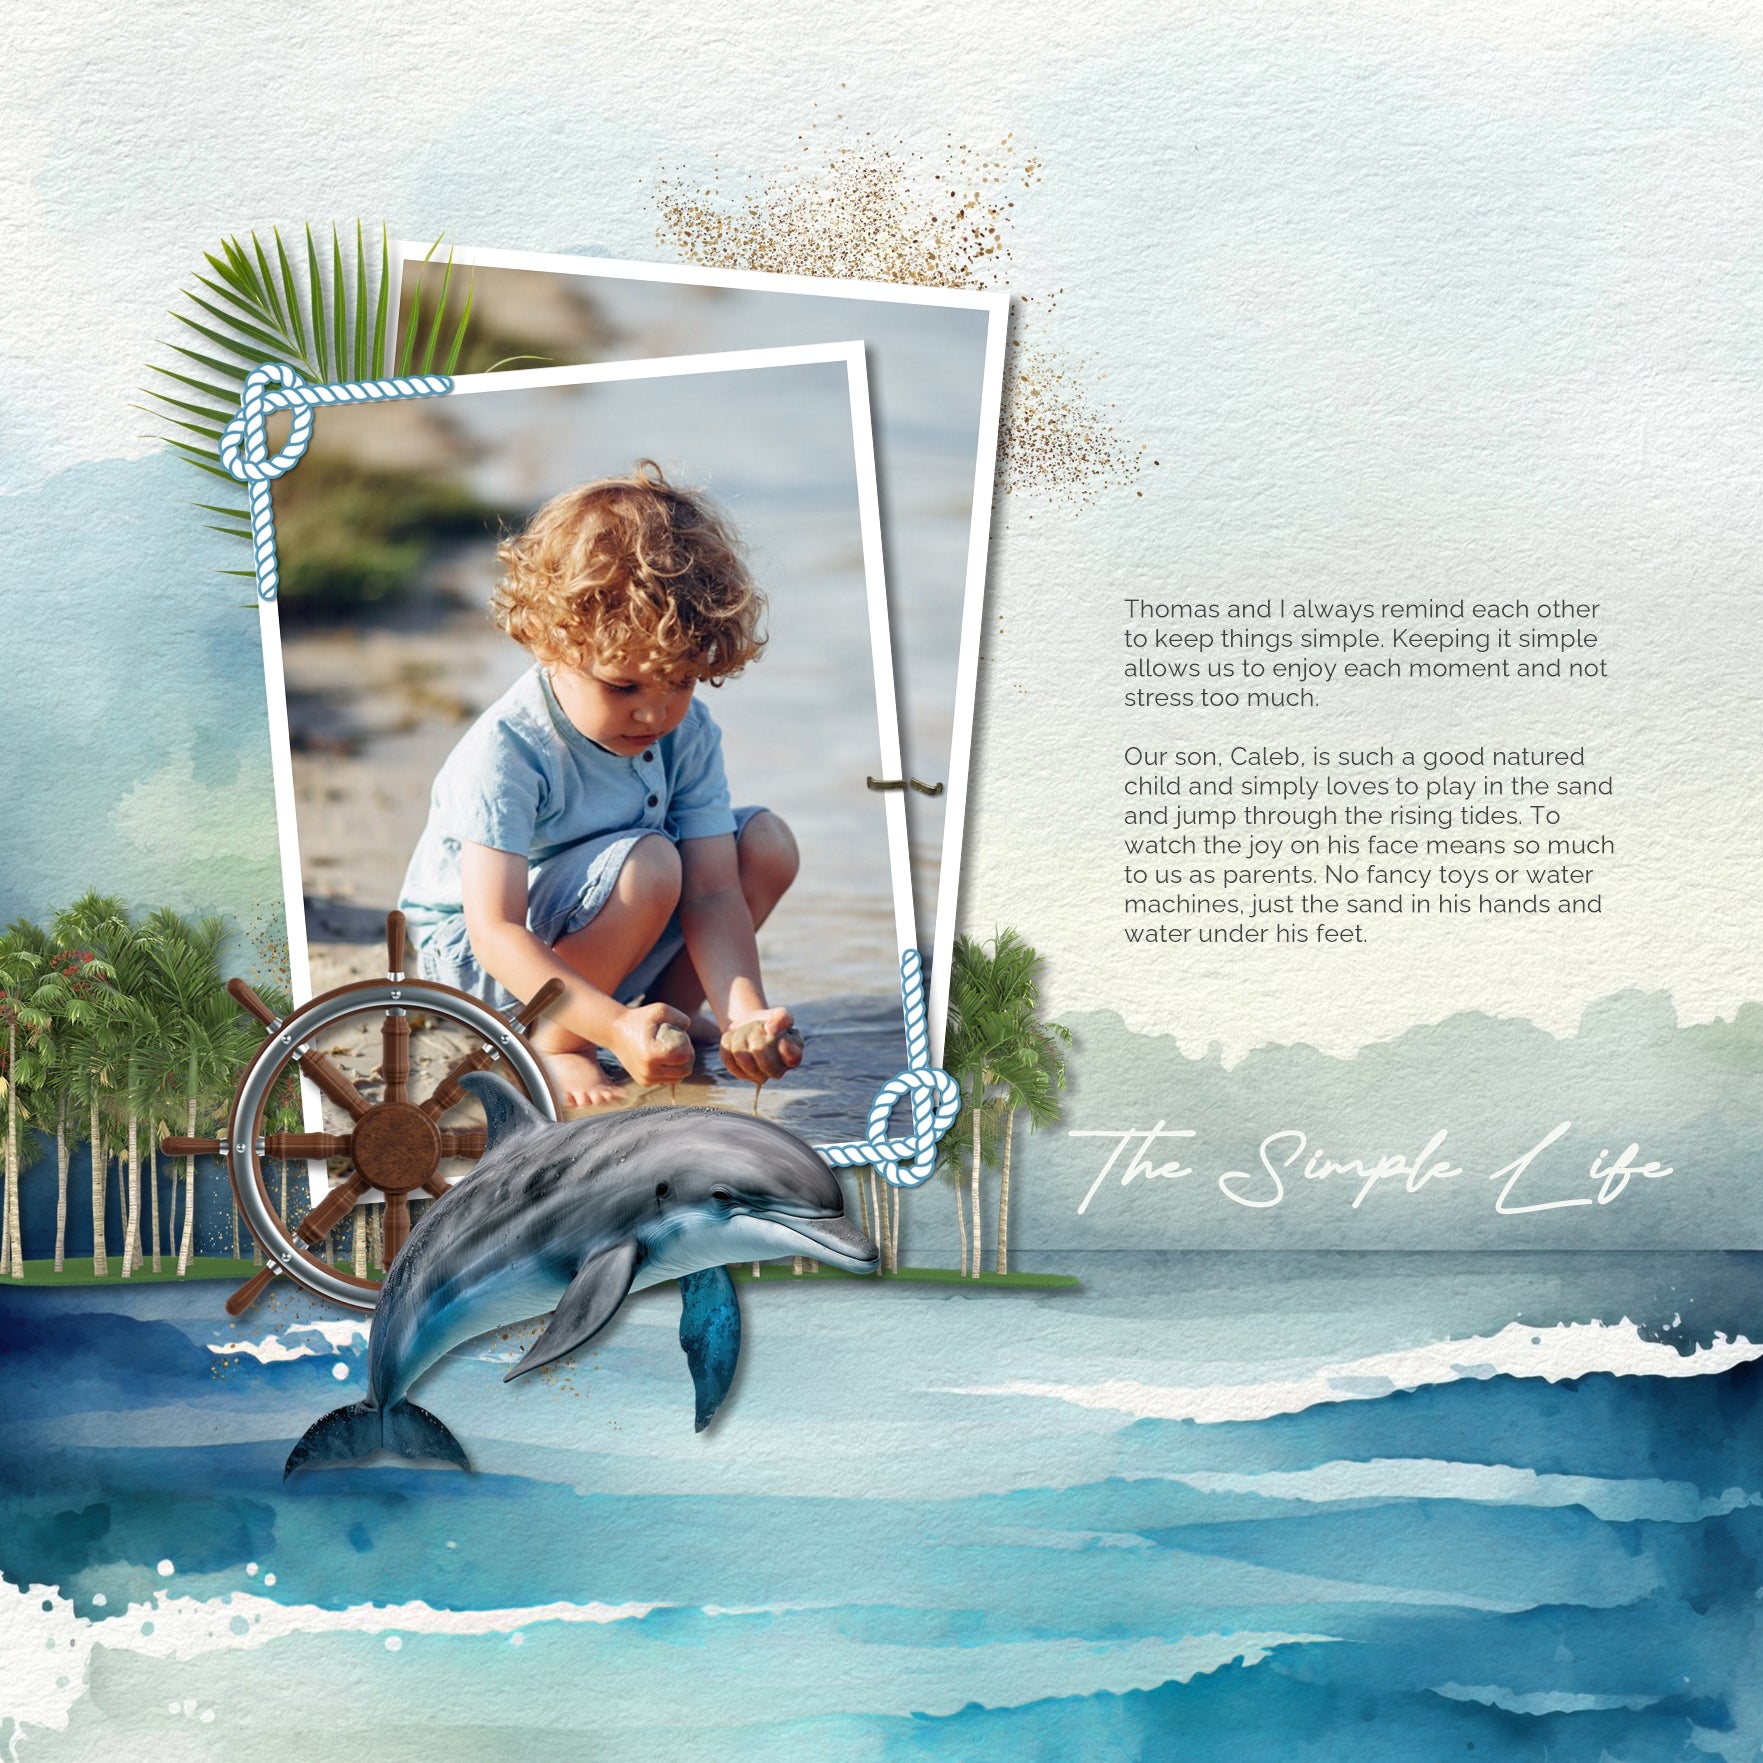 Highlight your tropical vacation and cruise ship memories with these beautiful realistic digital embellishments, watercolor papers, frames, water splashes, signage, and more by Lucky Girl Creative. Great for holidays to Hawaii, the Caribbean, Florida, California, cruise ship adventures, and beach vacations.